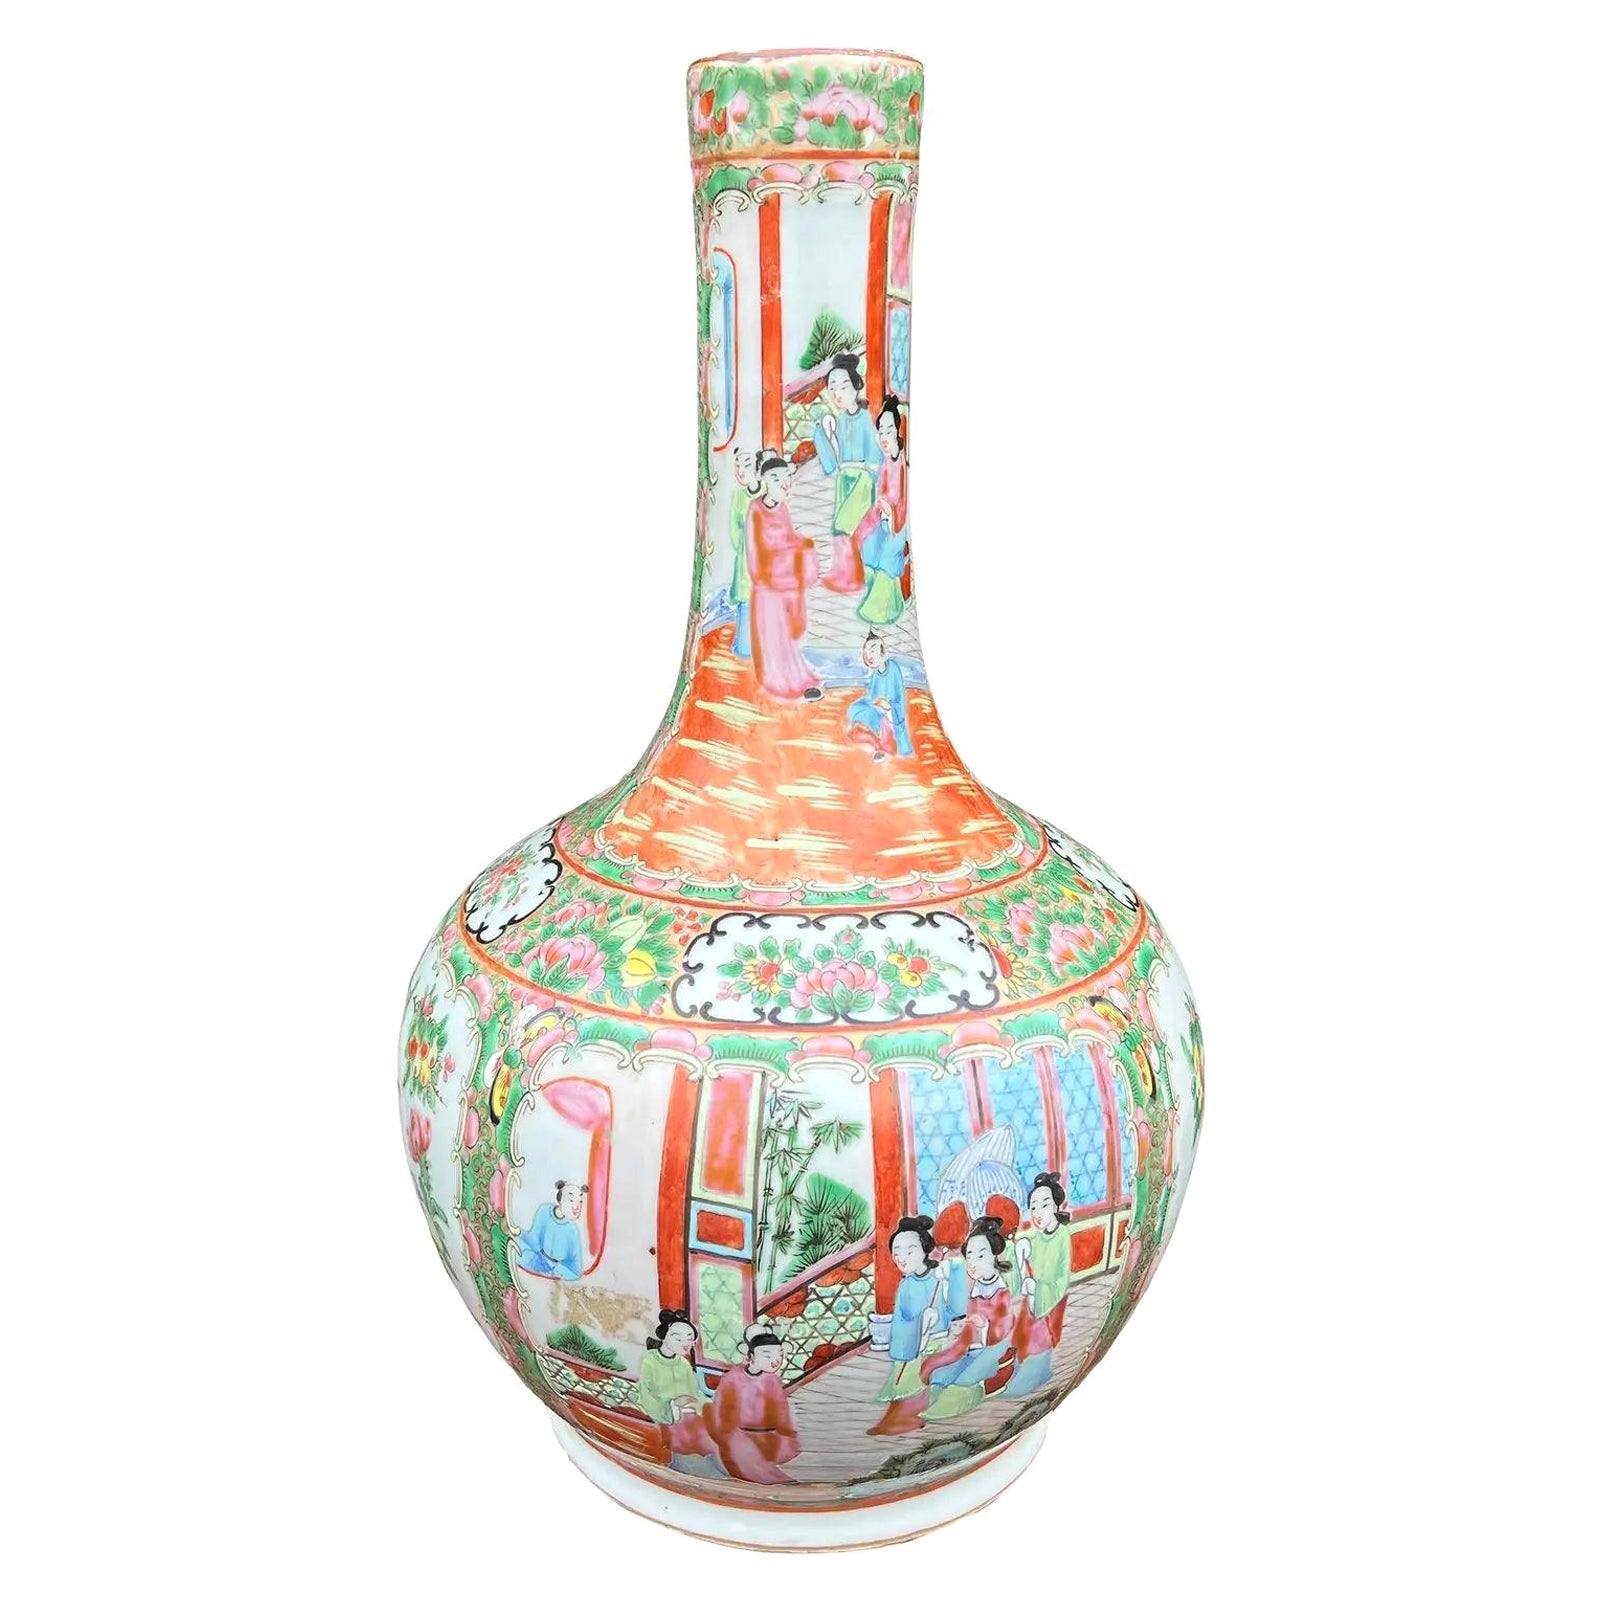 Antique Chinese Pottery Rose Medallion Bottle Vase, Early 19th Century For Sale